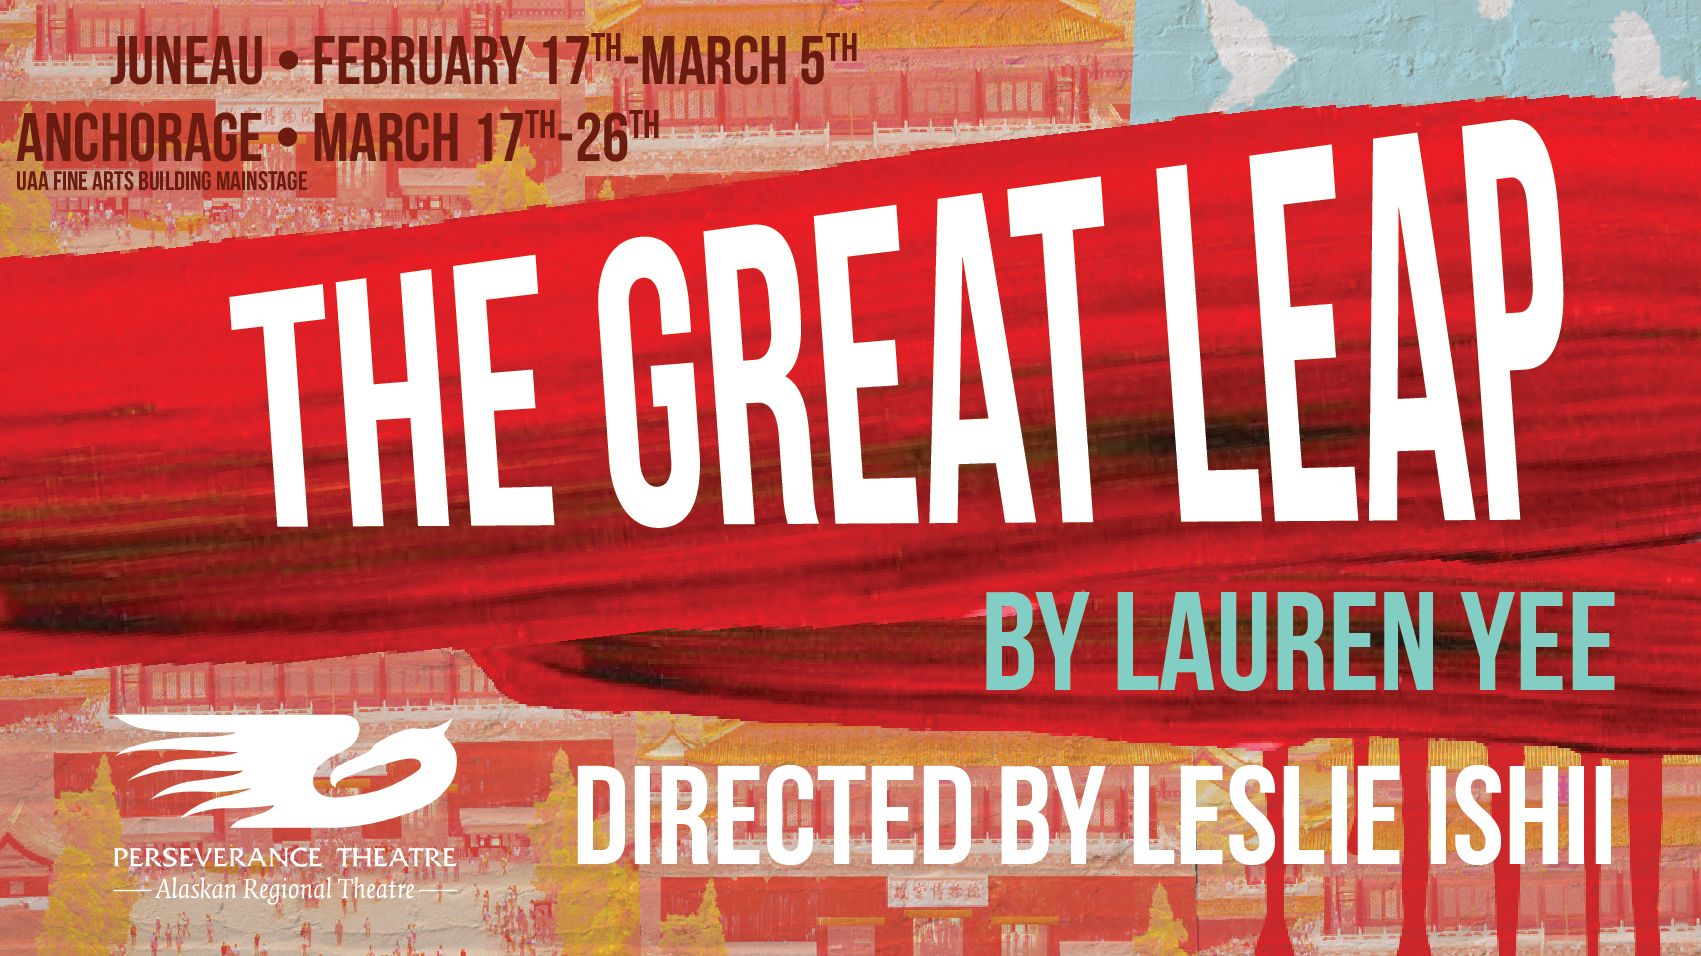 The Great Leap by Lauren Yee, Directed by Leslie Ishii